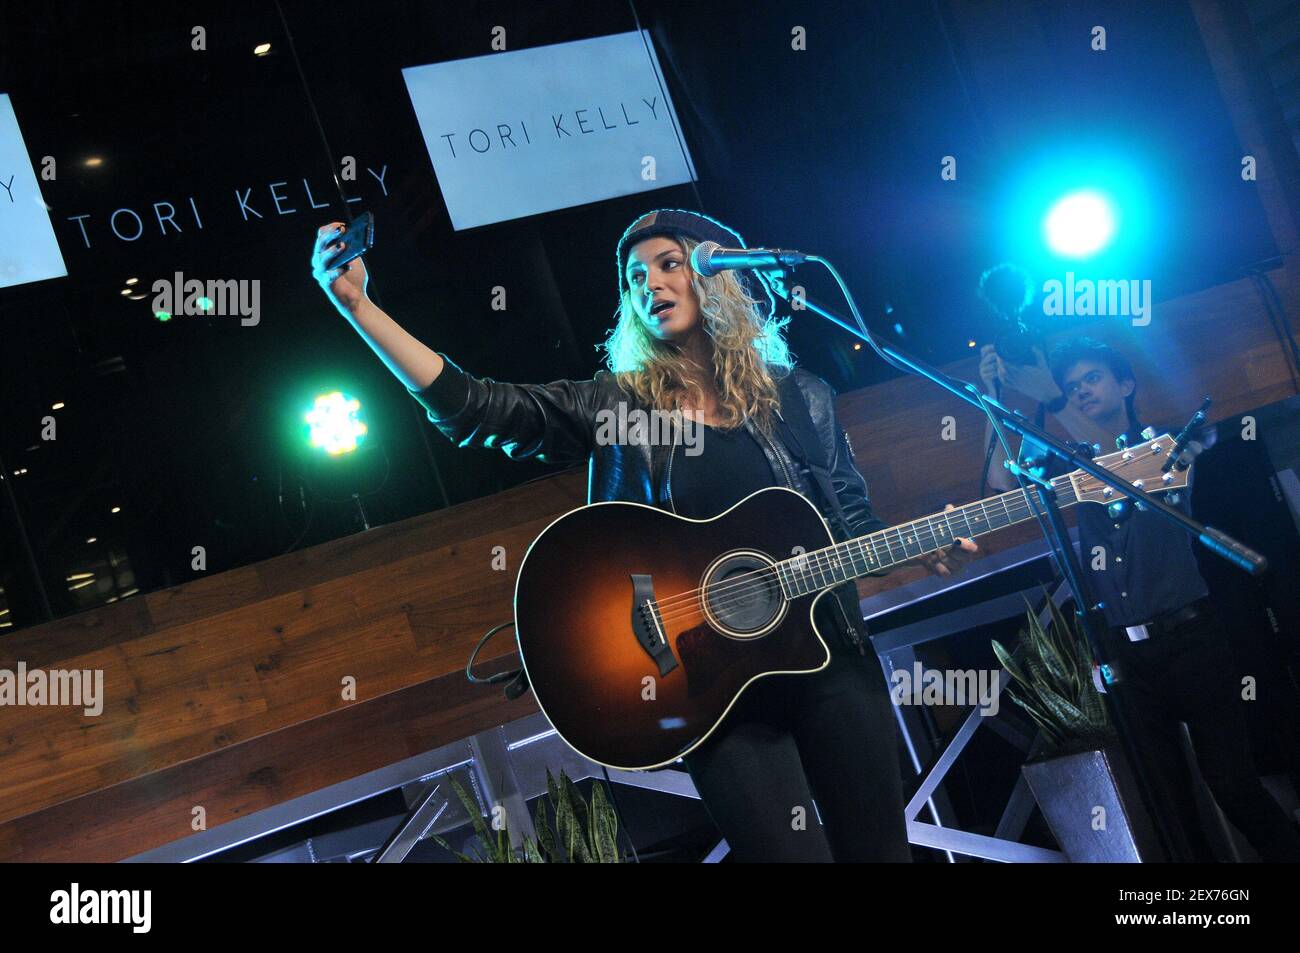 Tori Kelly Performing At Her Unbreakable Smile Album Release Live Stream Event Held At The